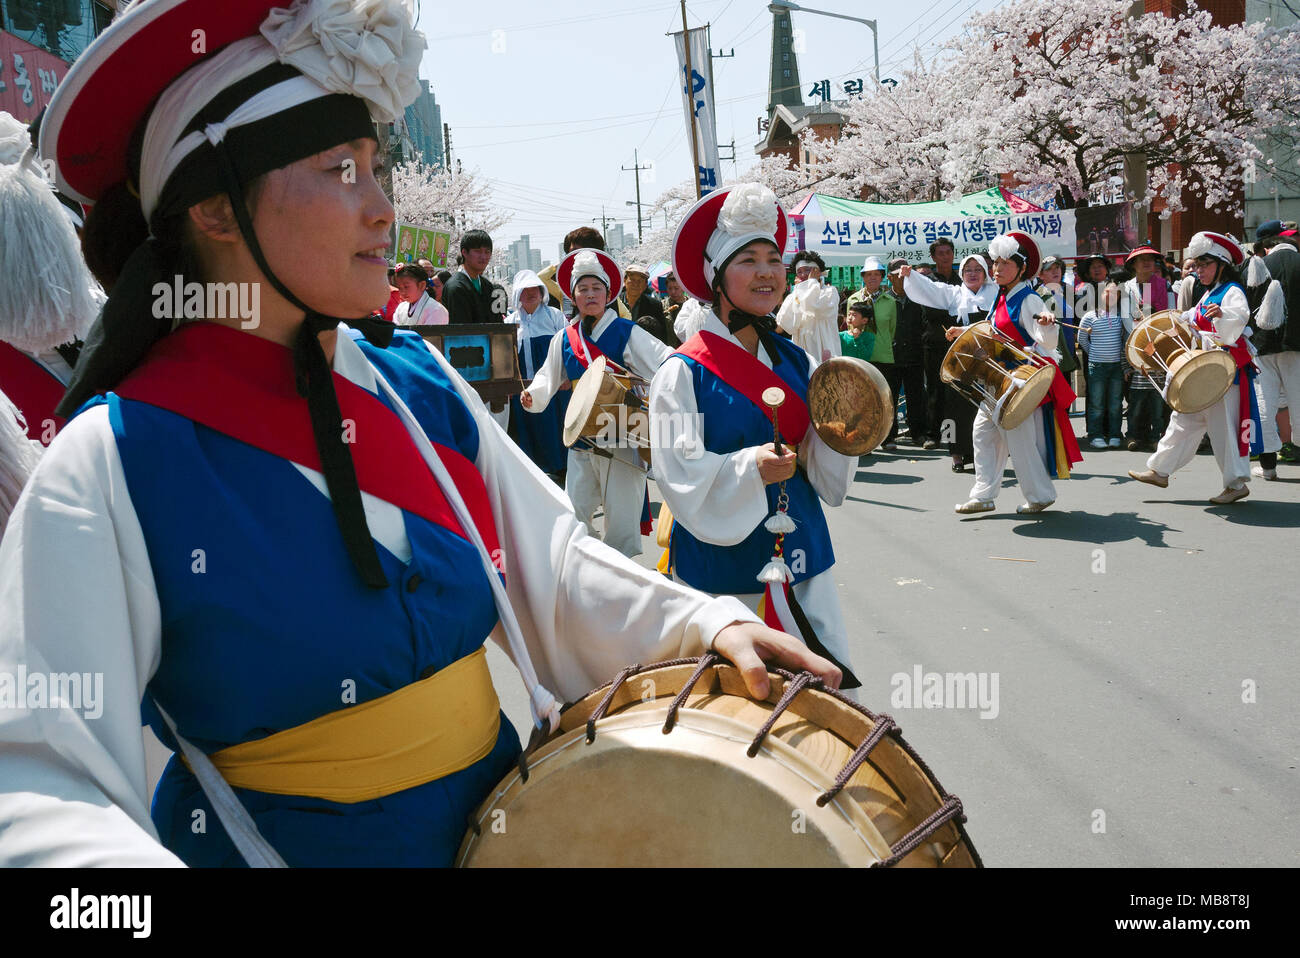 Women perform a traditional dance known as Pungmulnori at a neighborhood festival celebrating the blooming of the cherry blossoms in Spring. Stock Photo